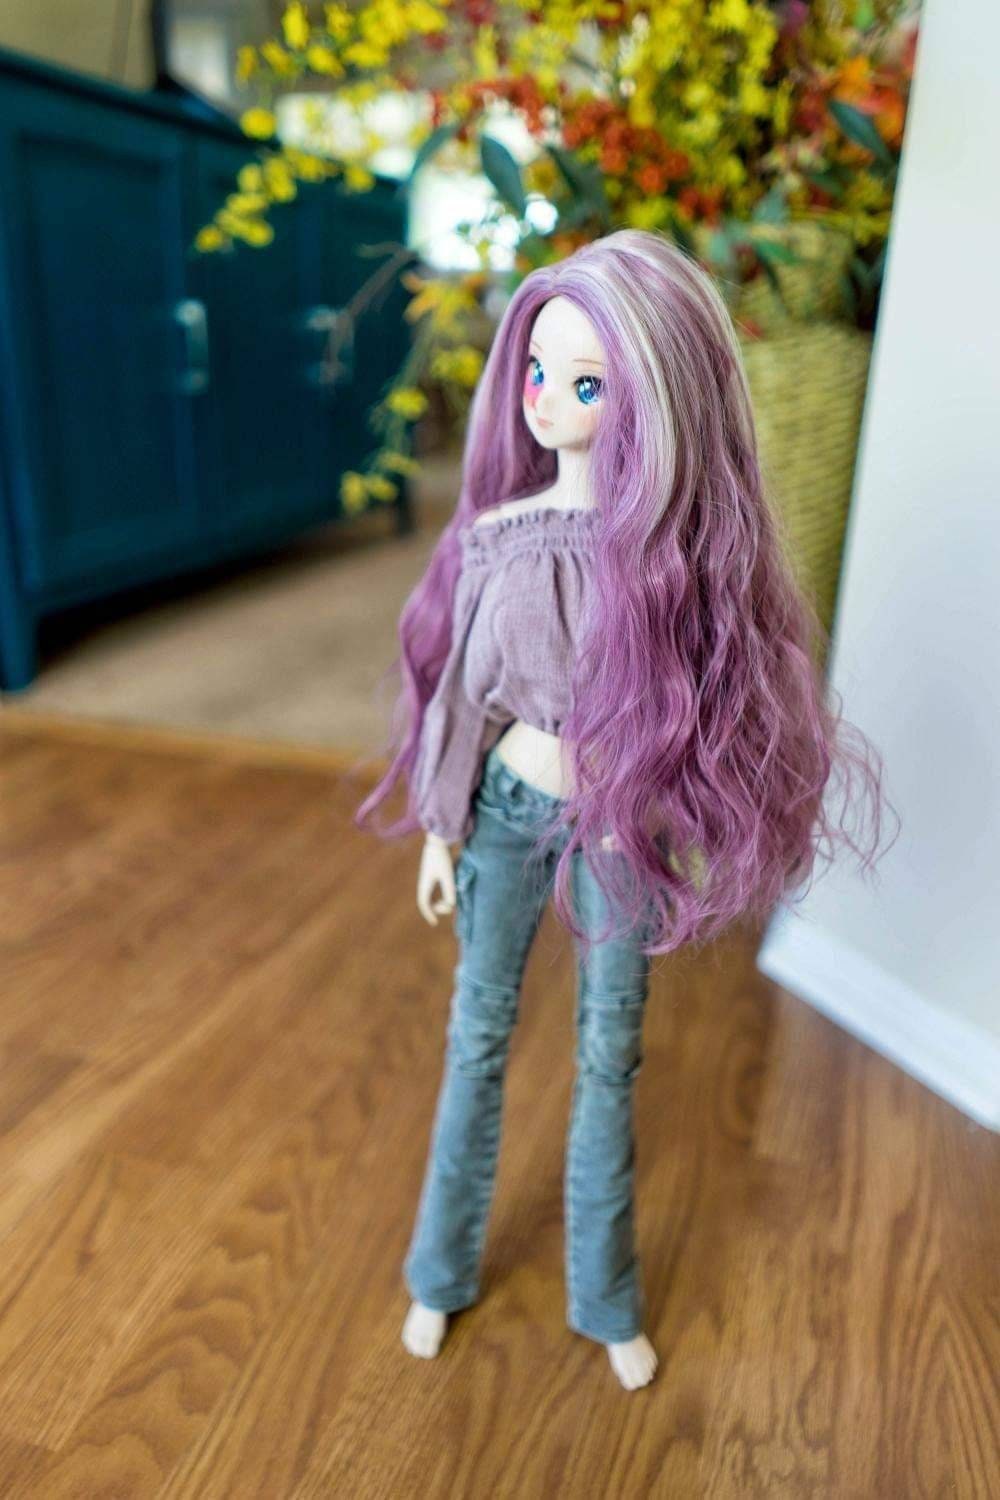 Custom doll Wig for Smart Dolls- Heat Safe - Tangle Resistant- 8.5" head size of Bjd, SD, Dollfie Dream dolls  Pink Mauve dyed ombre